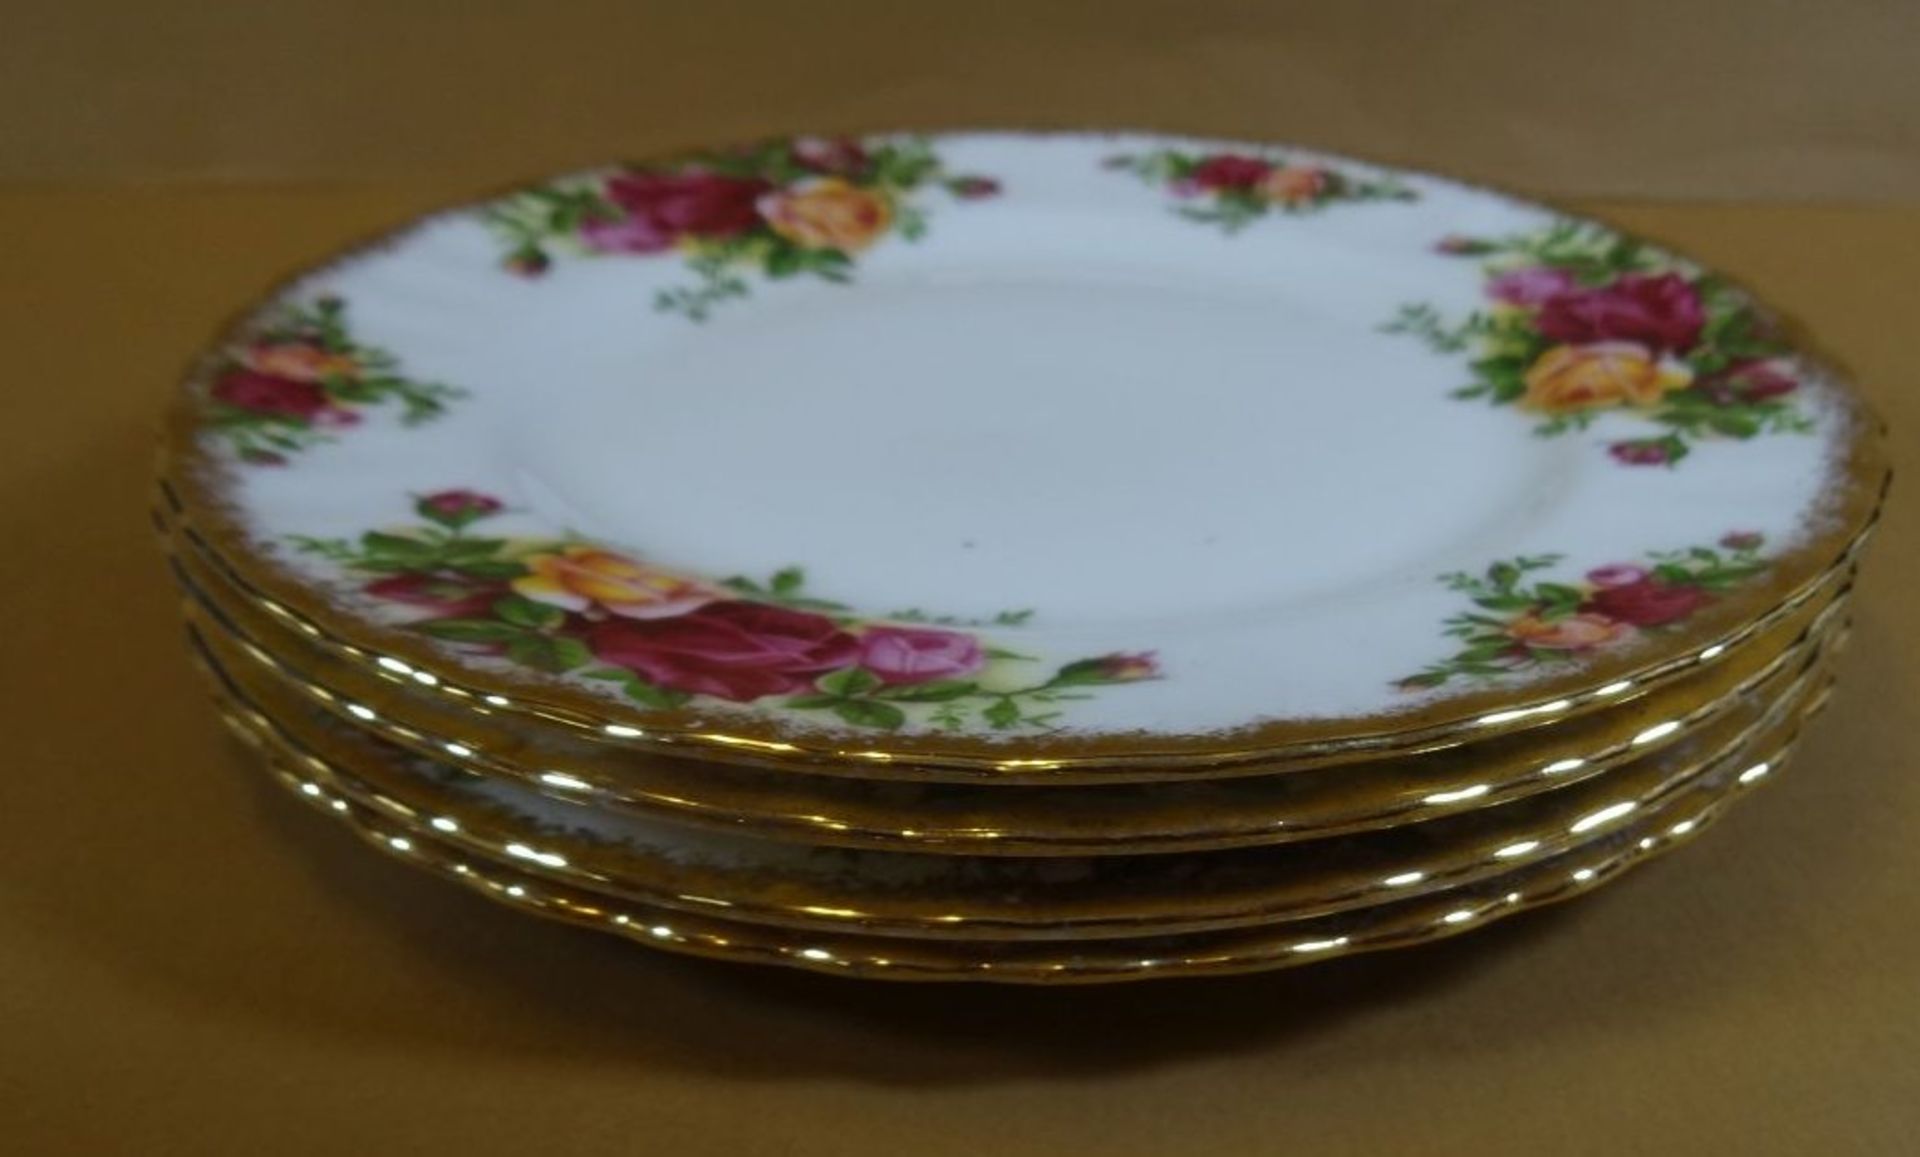 21 Serviceteile "Royal Albert" Old Country Roses, 1x Chip - Image 5 of 17